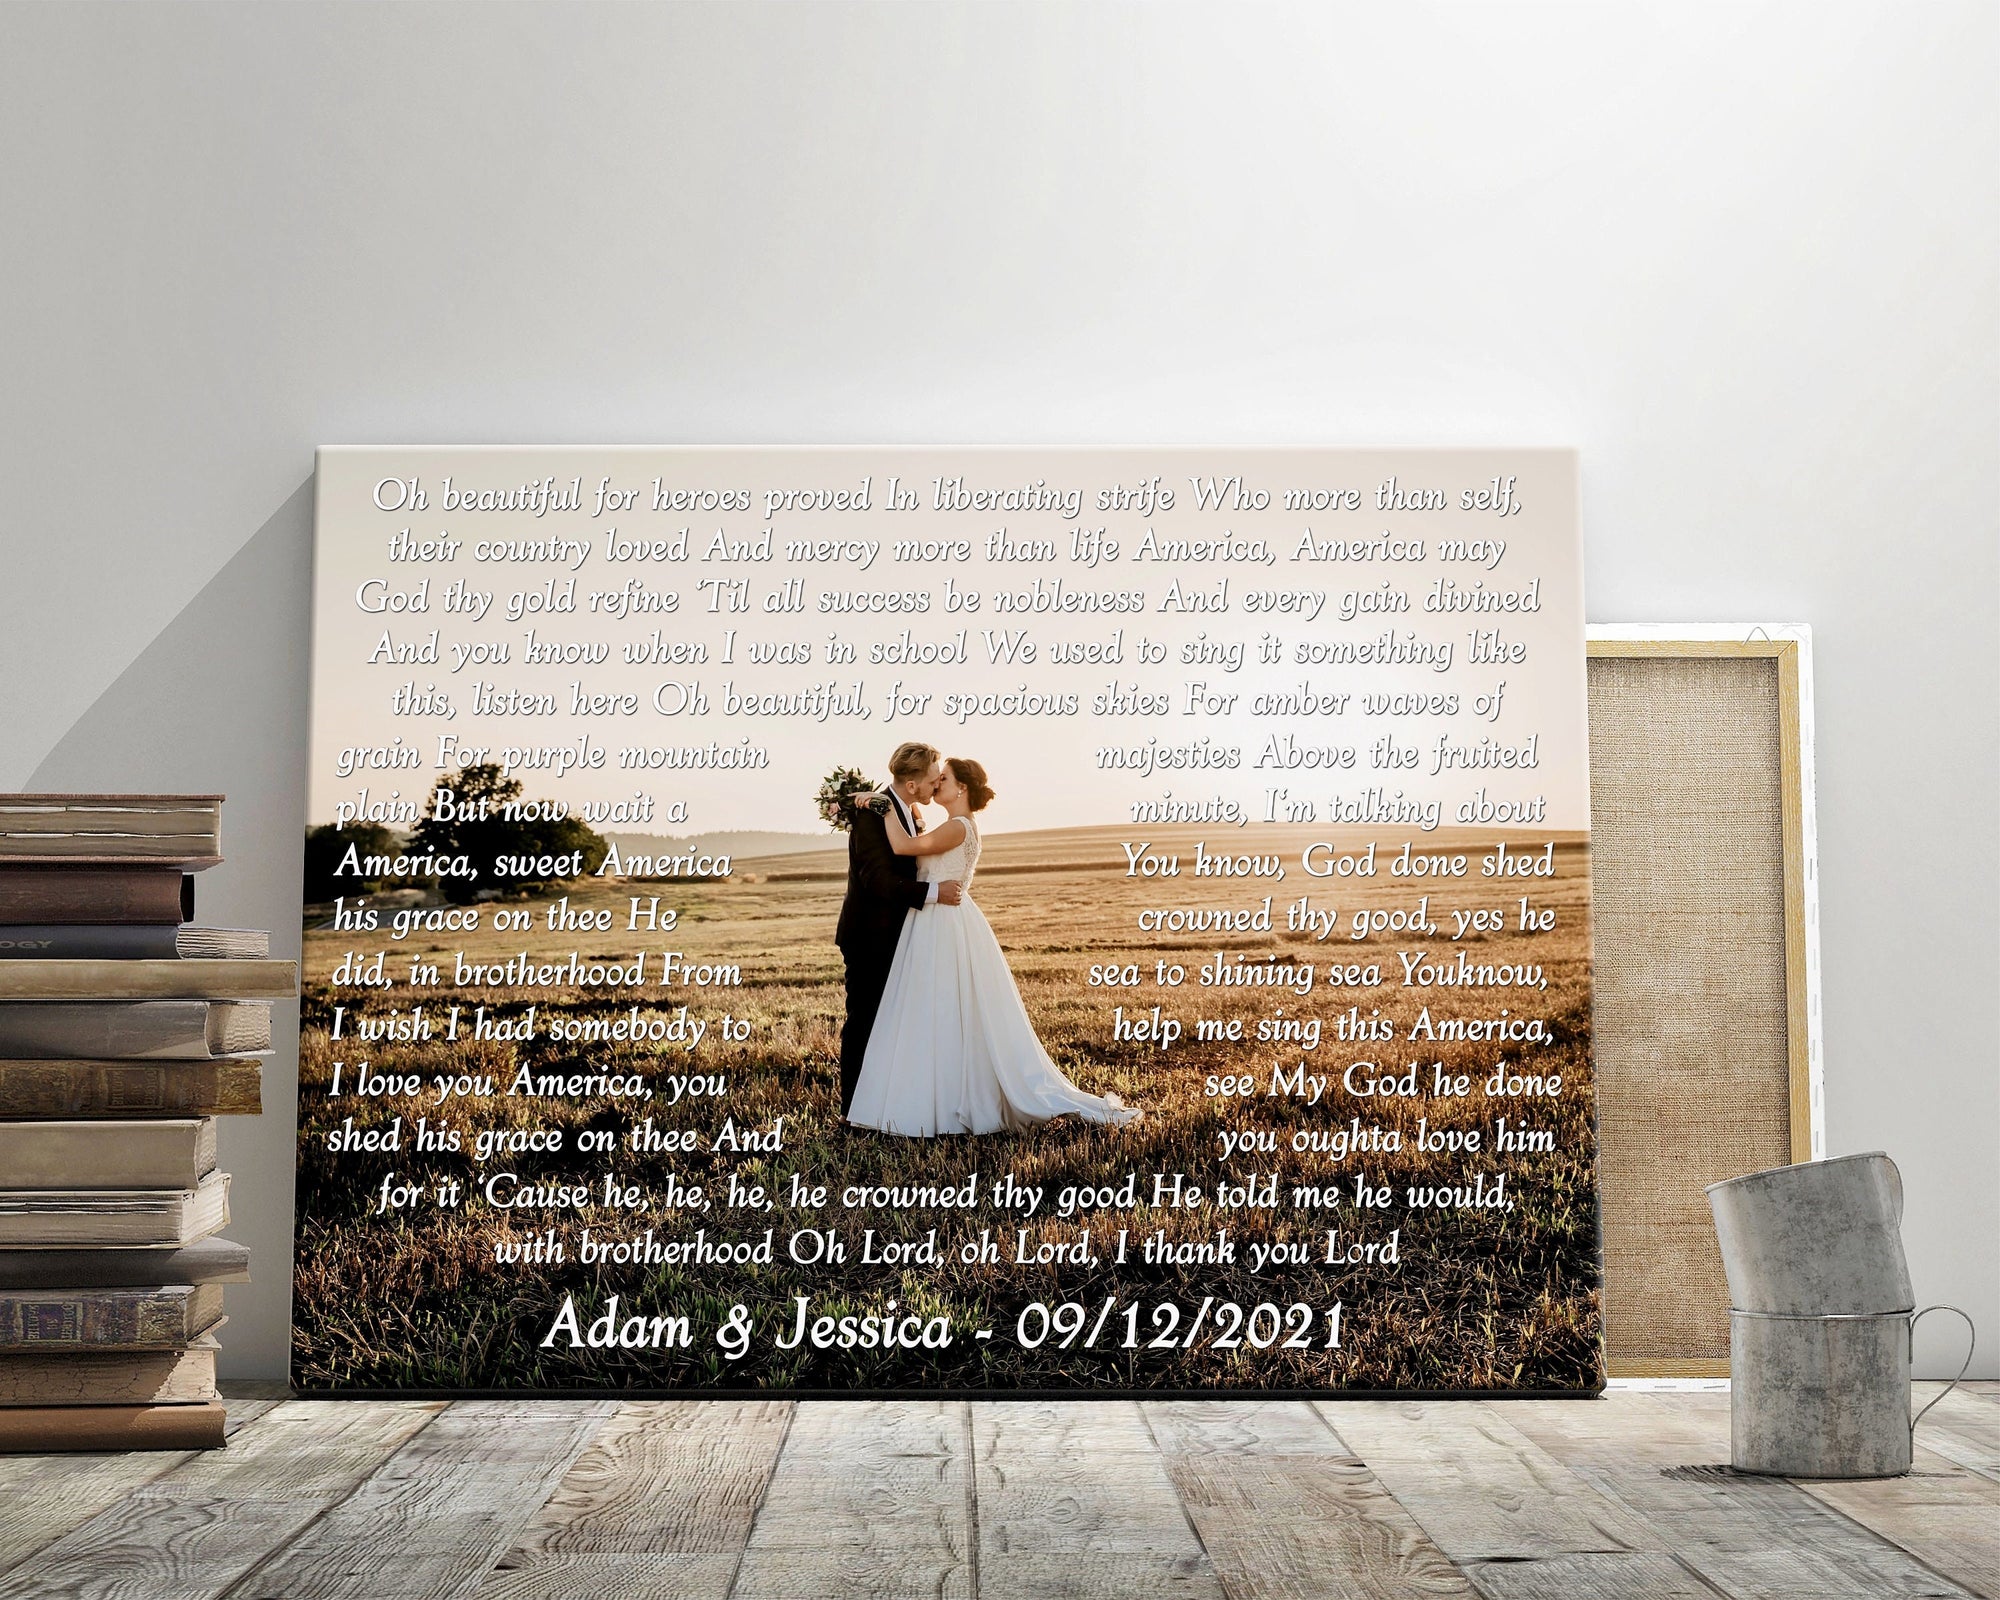 Wedding Gift Ideas For Couple Personalized Gift For Bride And Groom - Oh  Canvas